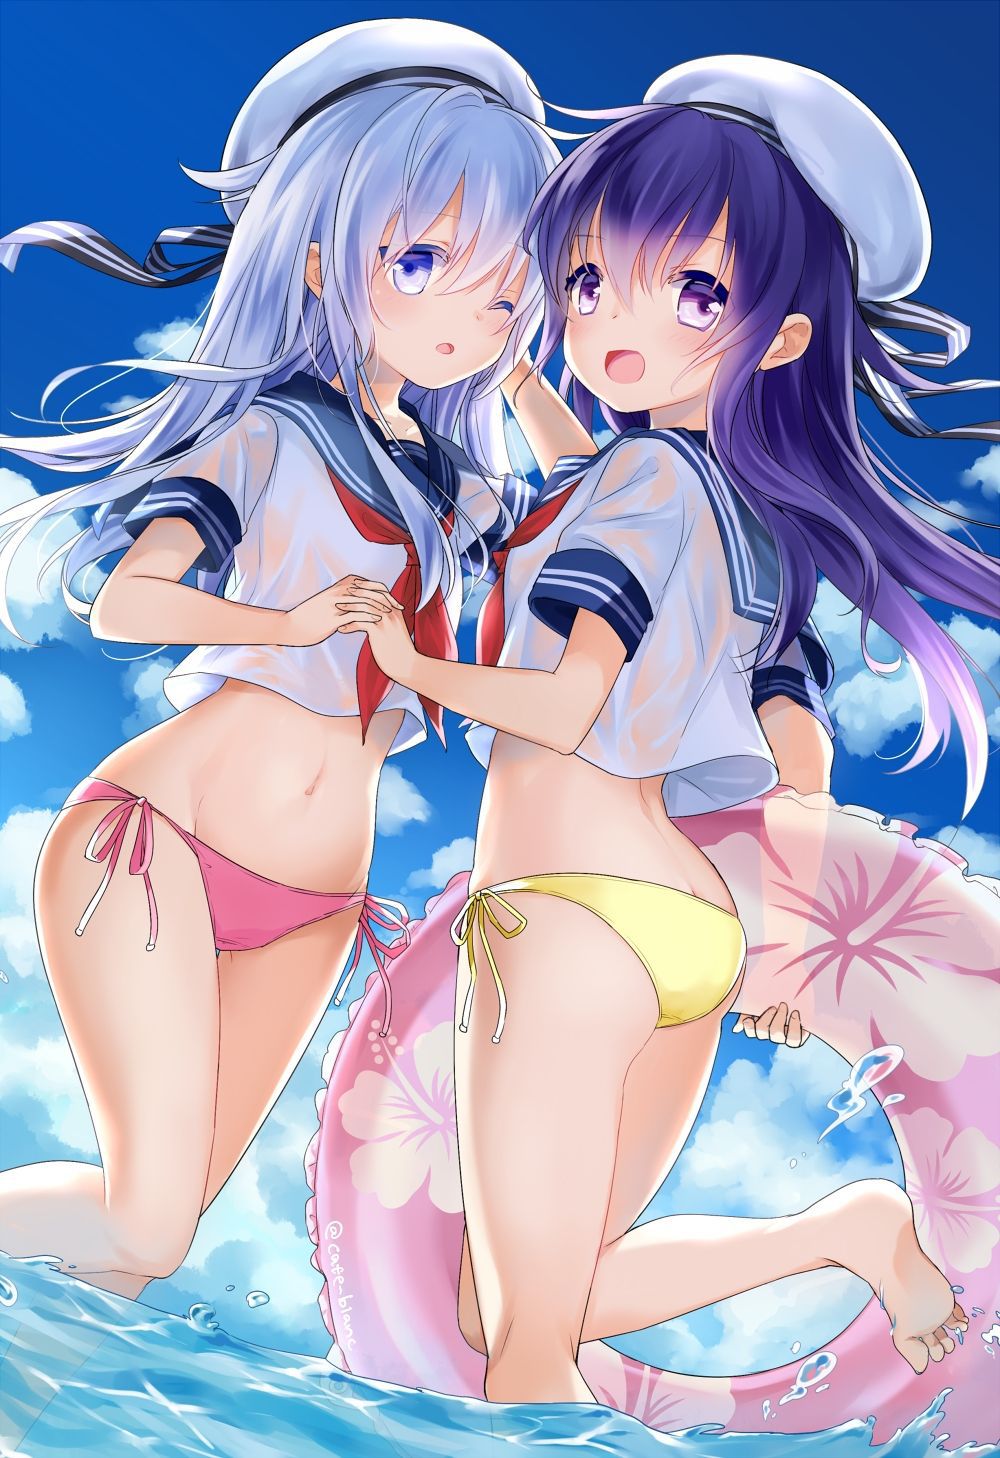 Lori Harrem erotic image come to seduce or throws here with two people in collusion and colluding with friends or sisters Lori Girl is [Temptation Loli]! 35